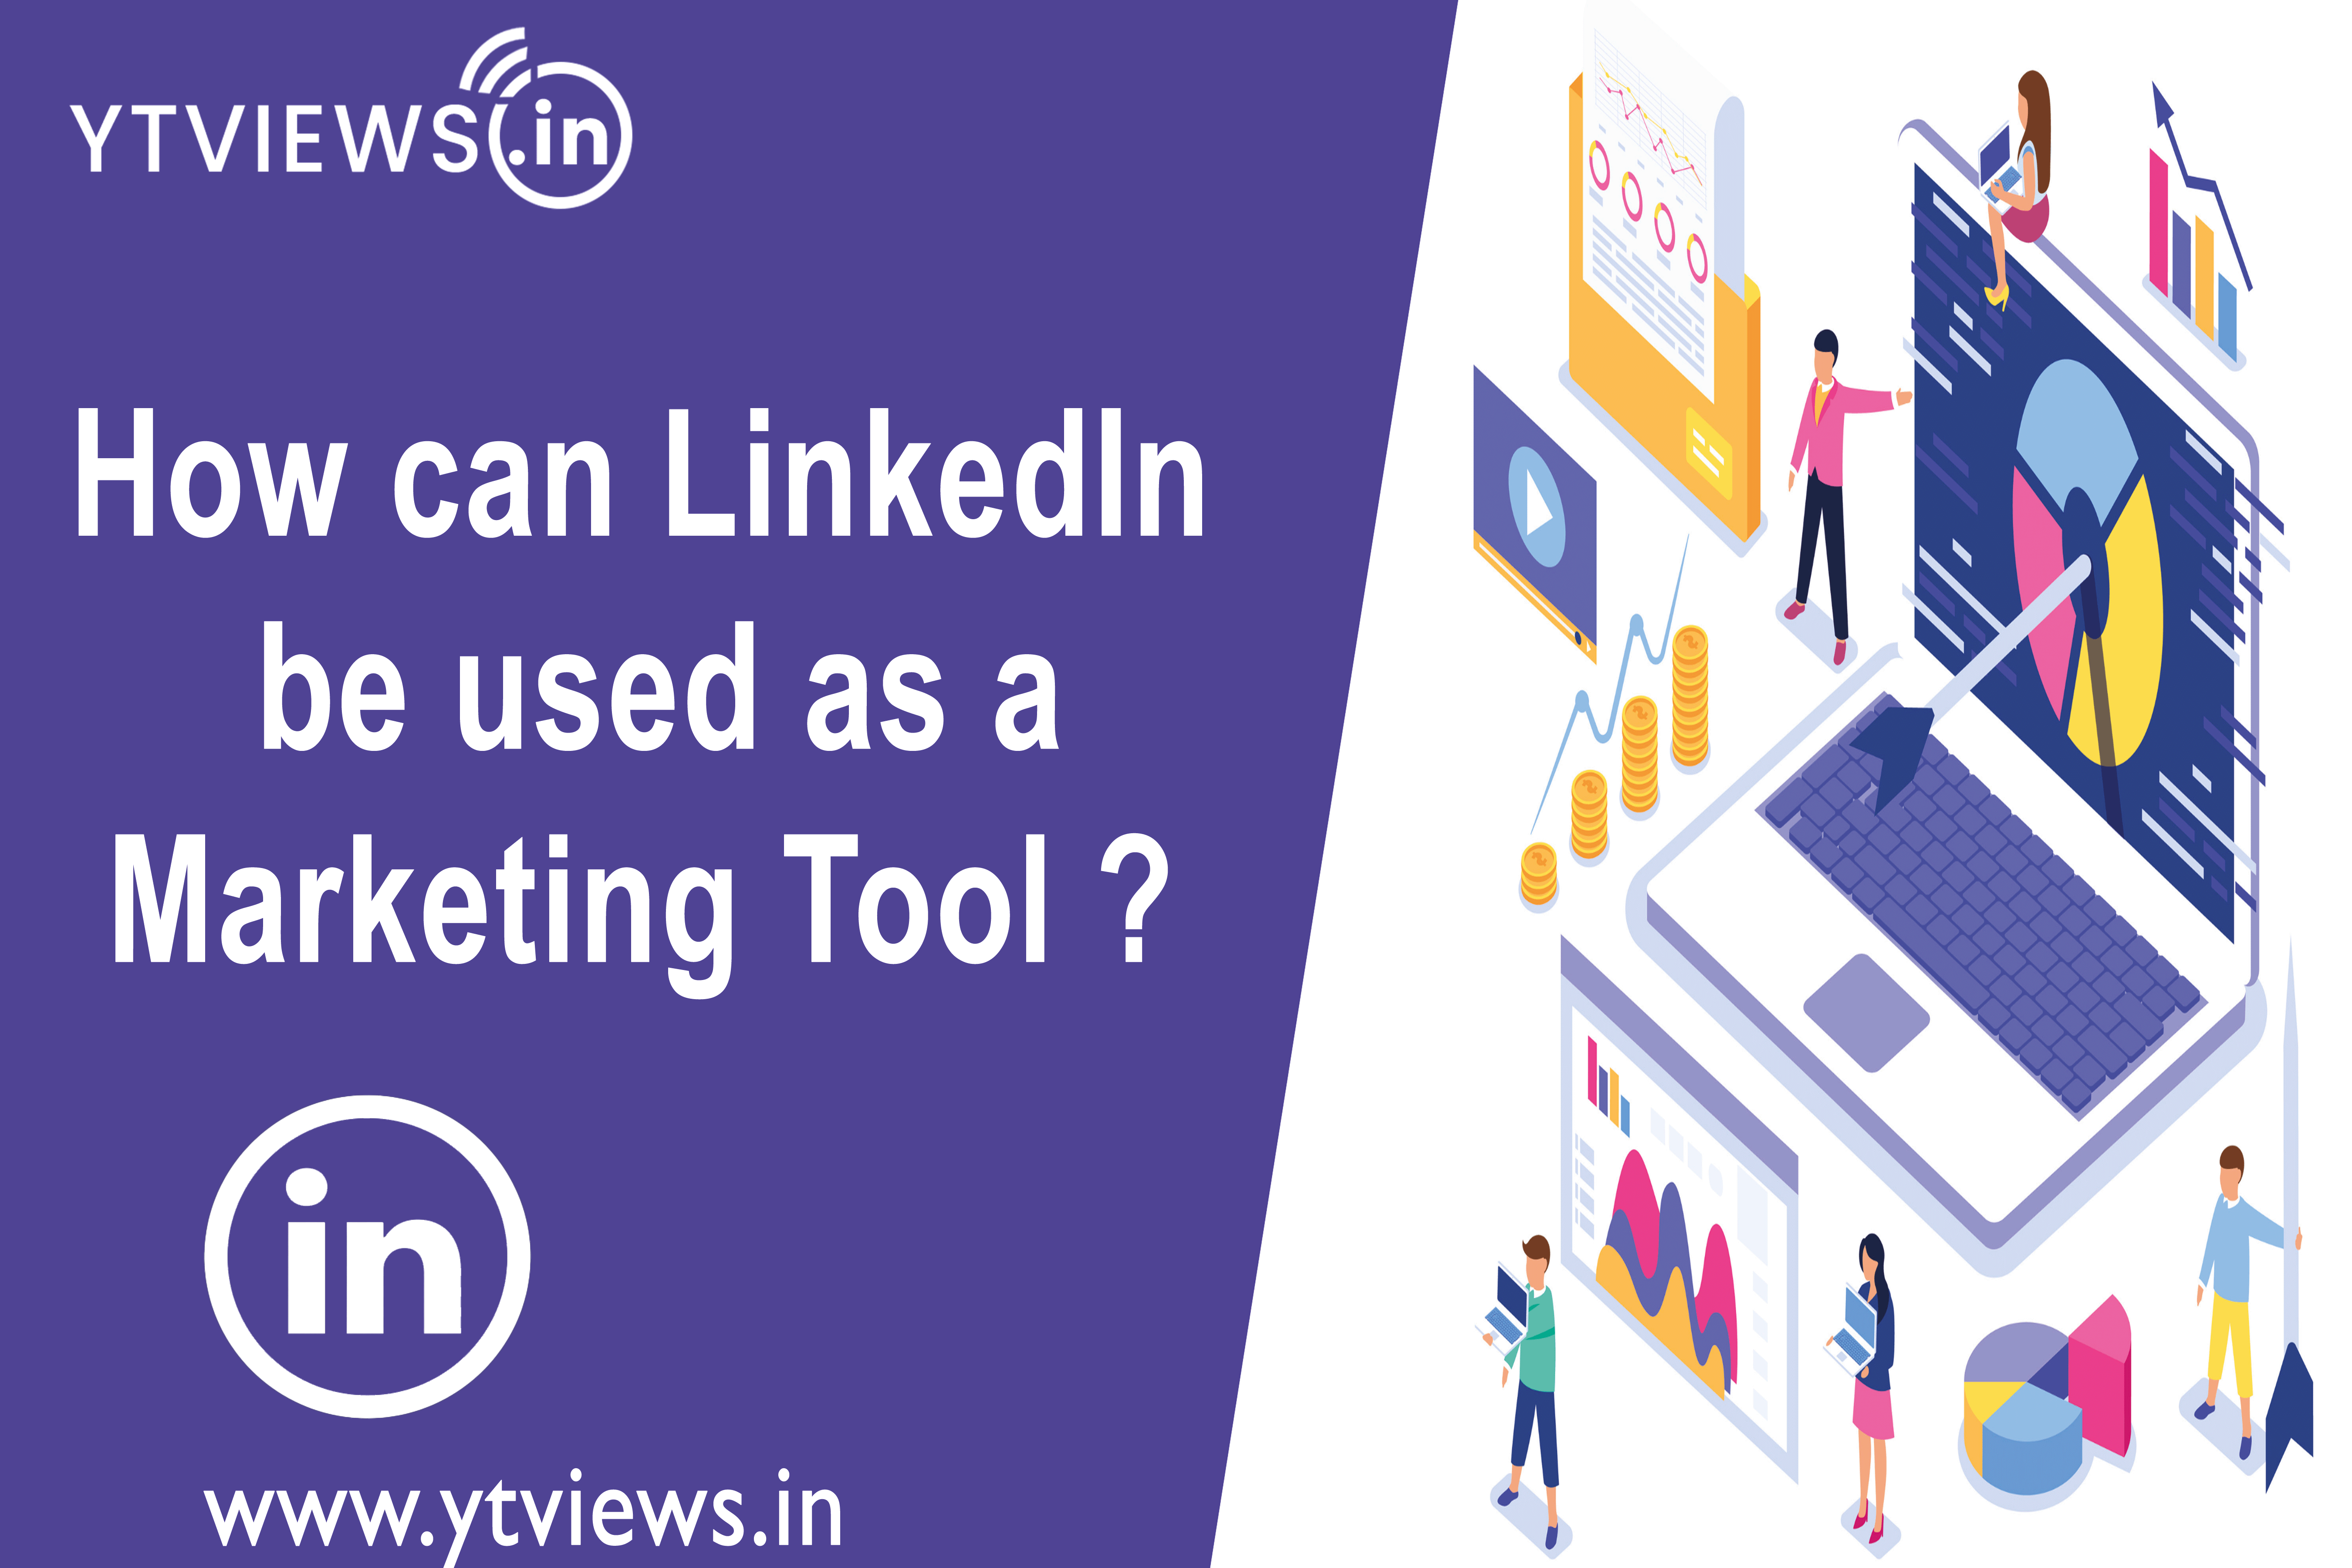 How can LinkedIn be used as a marketing tool?